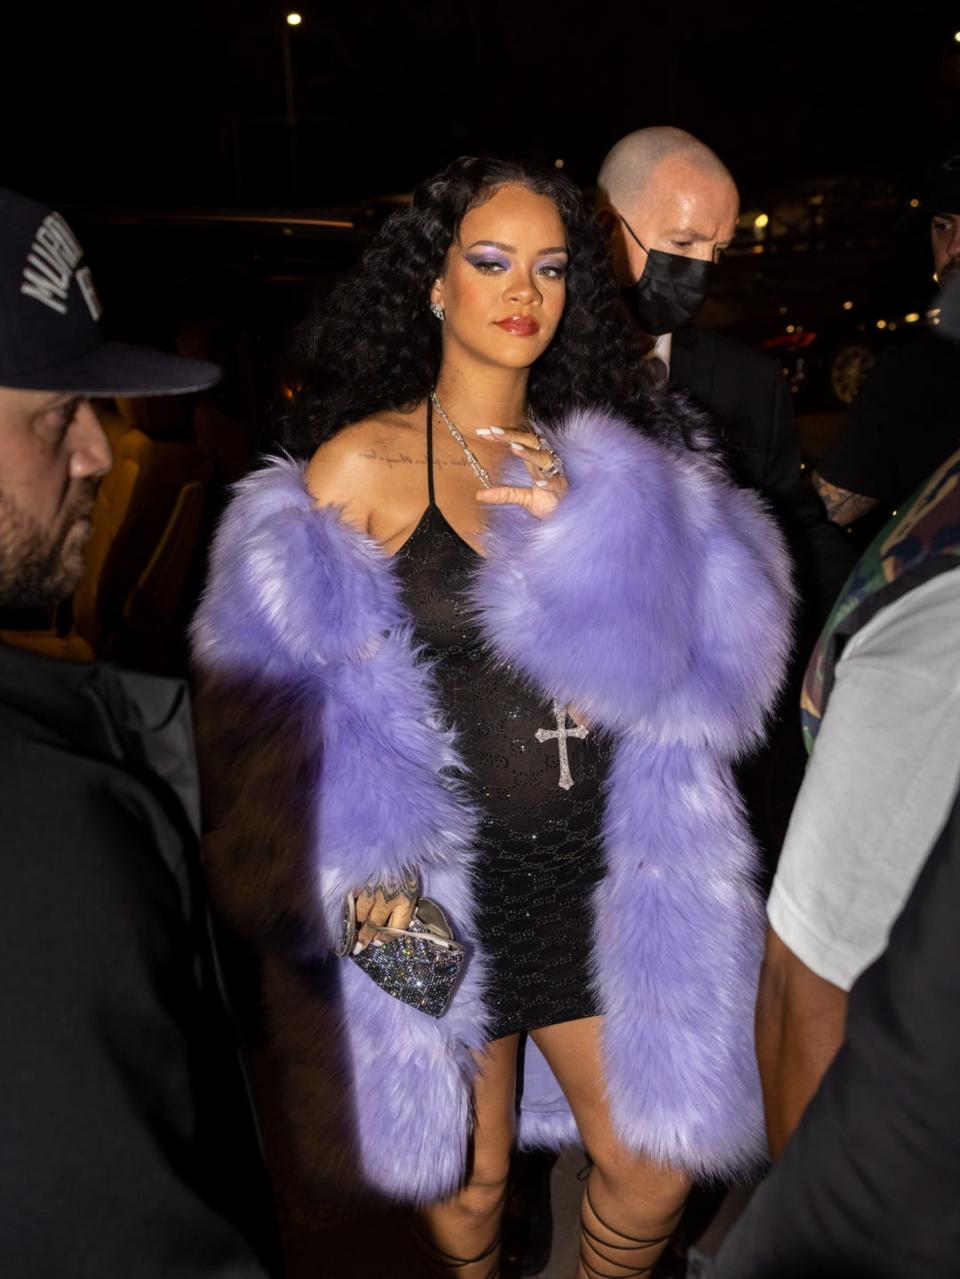 10) Rihanna attends Gucci after party in Milan, February 2022